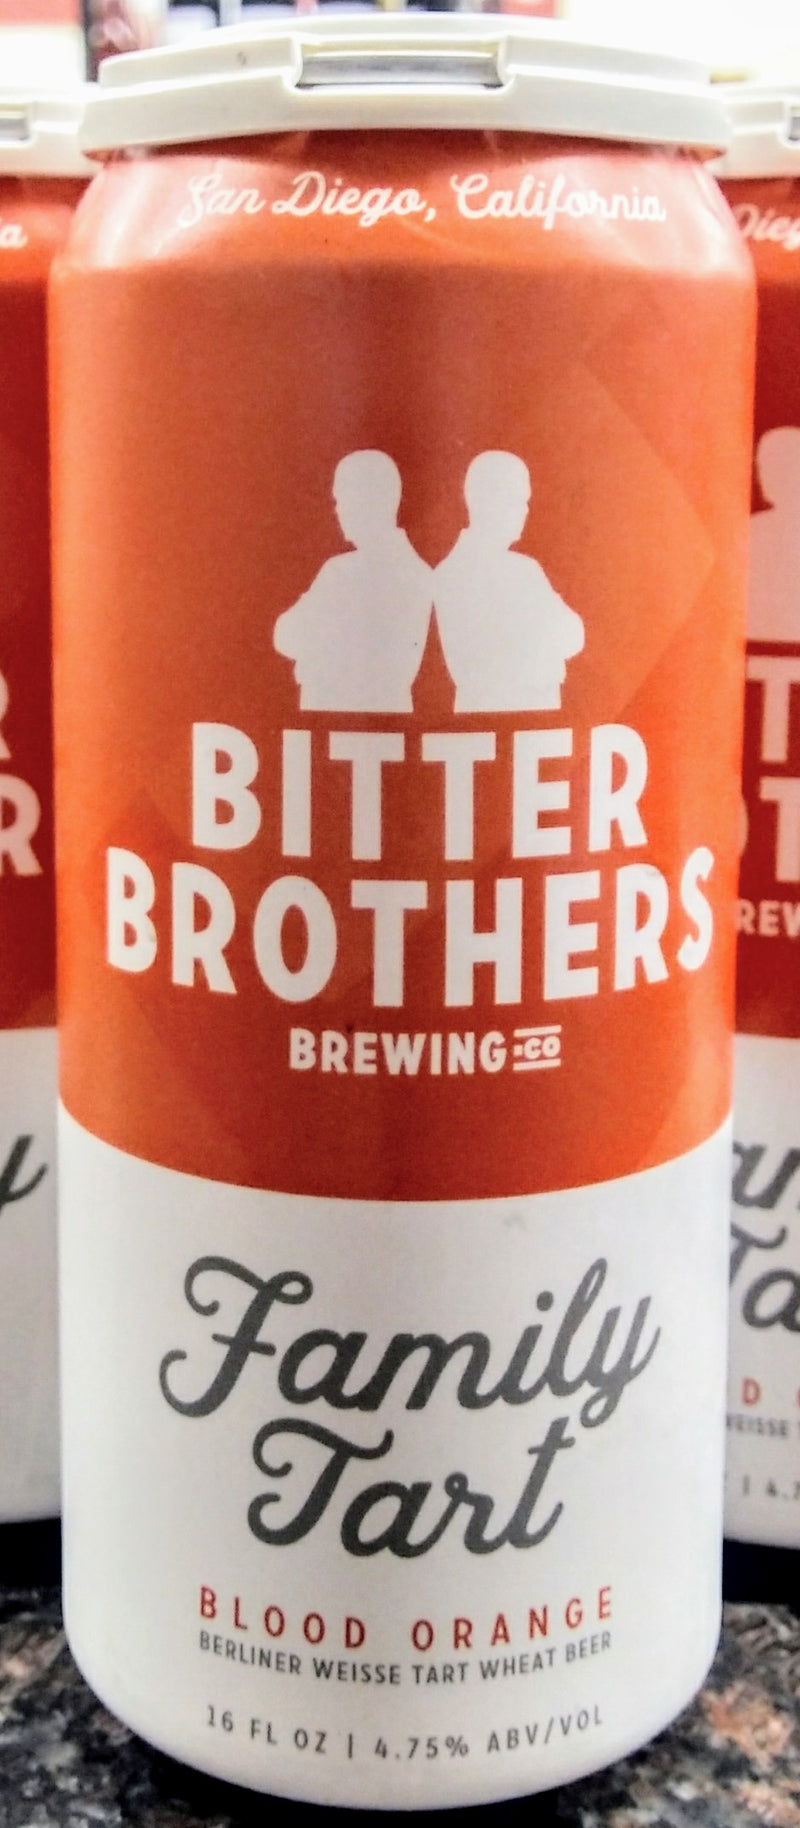 BITTER BROTHERS BREWING CO. FAMILY TART BERLINER WEISSE WHEAT ALE 16oz can